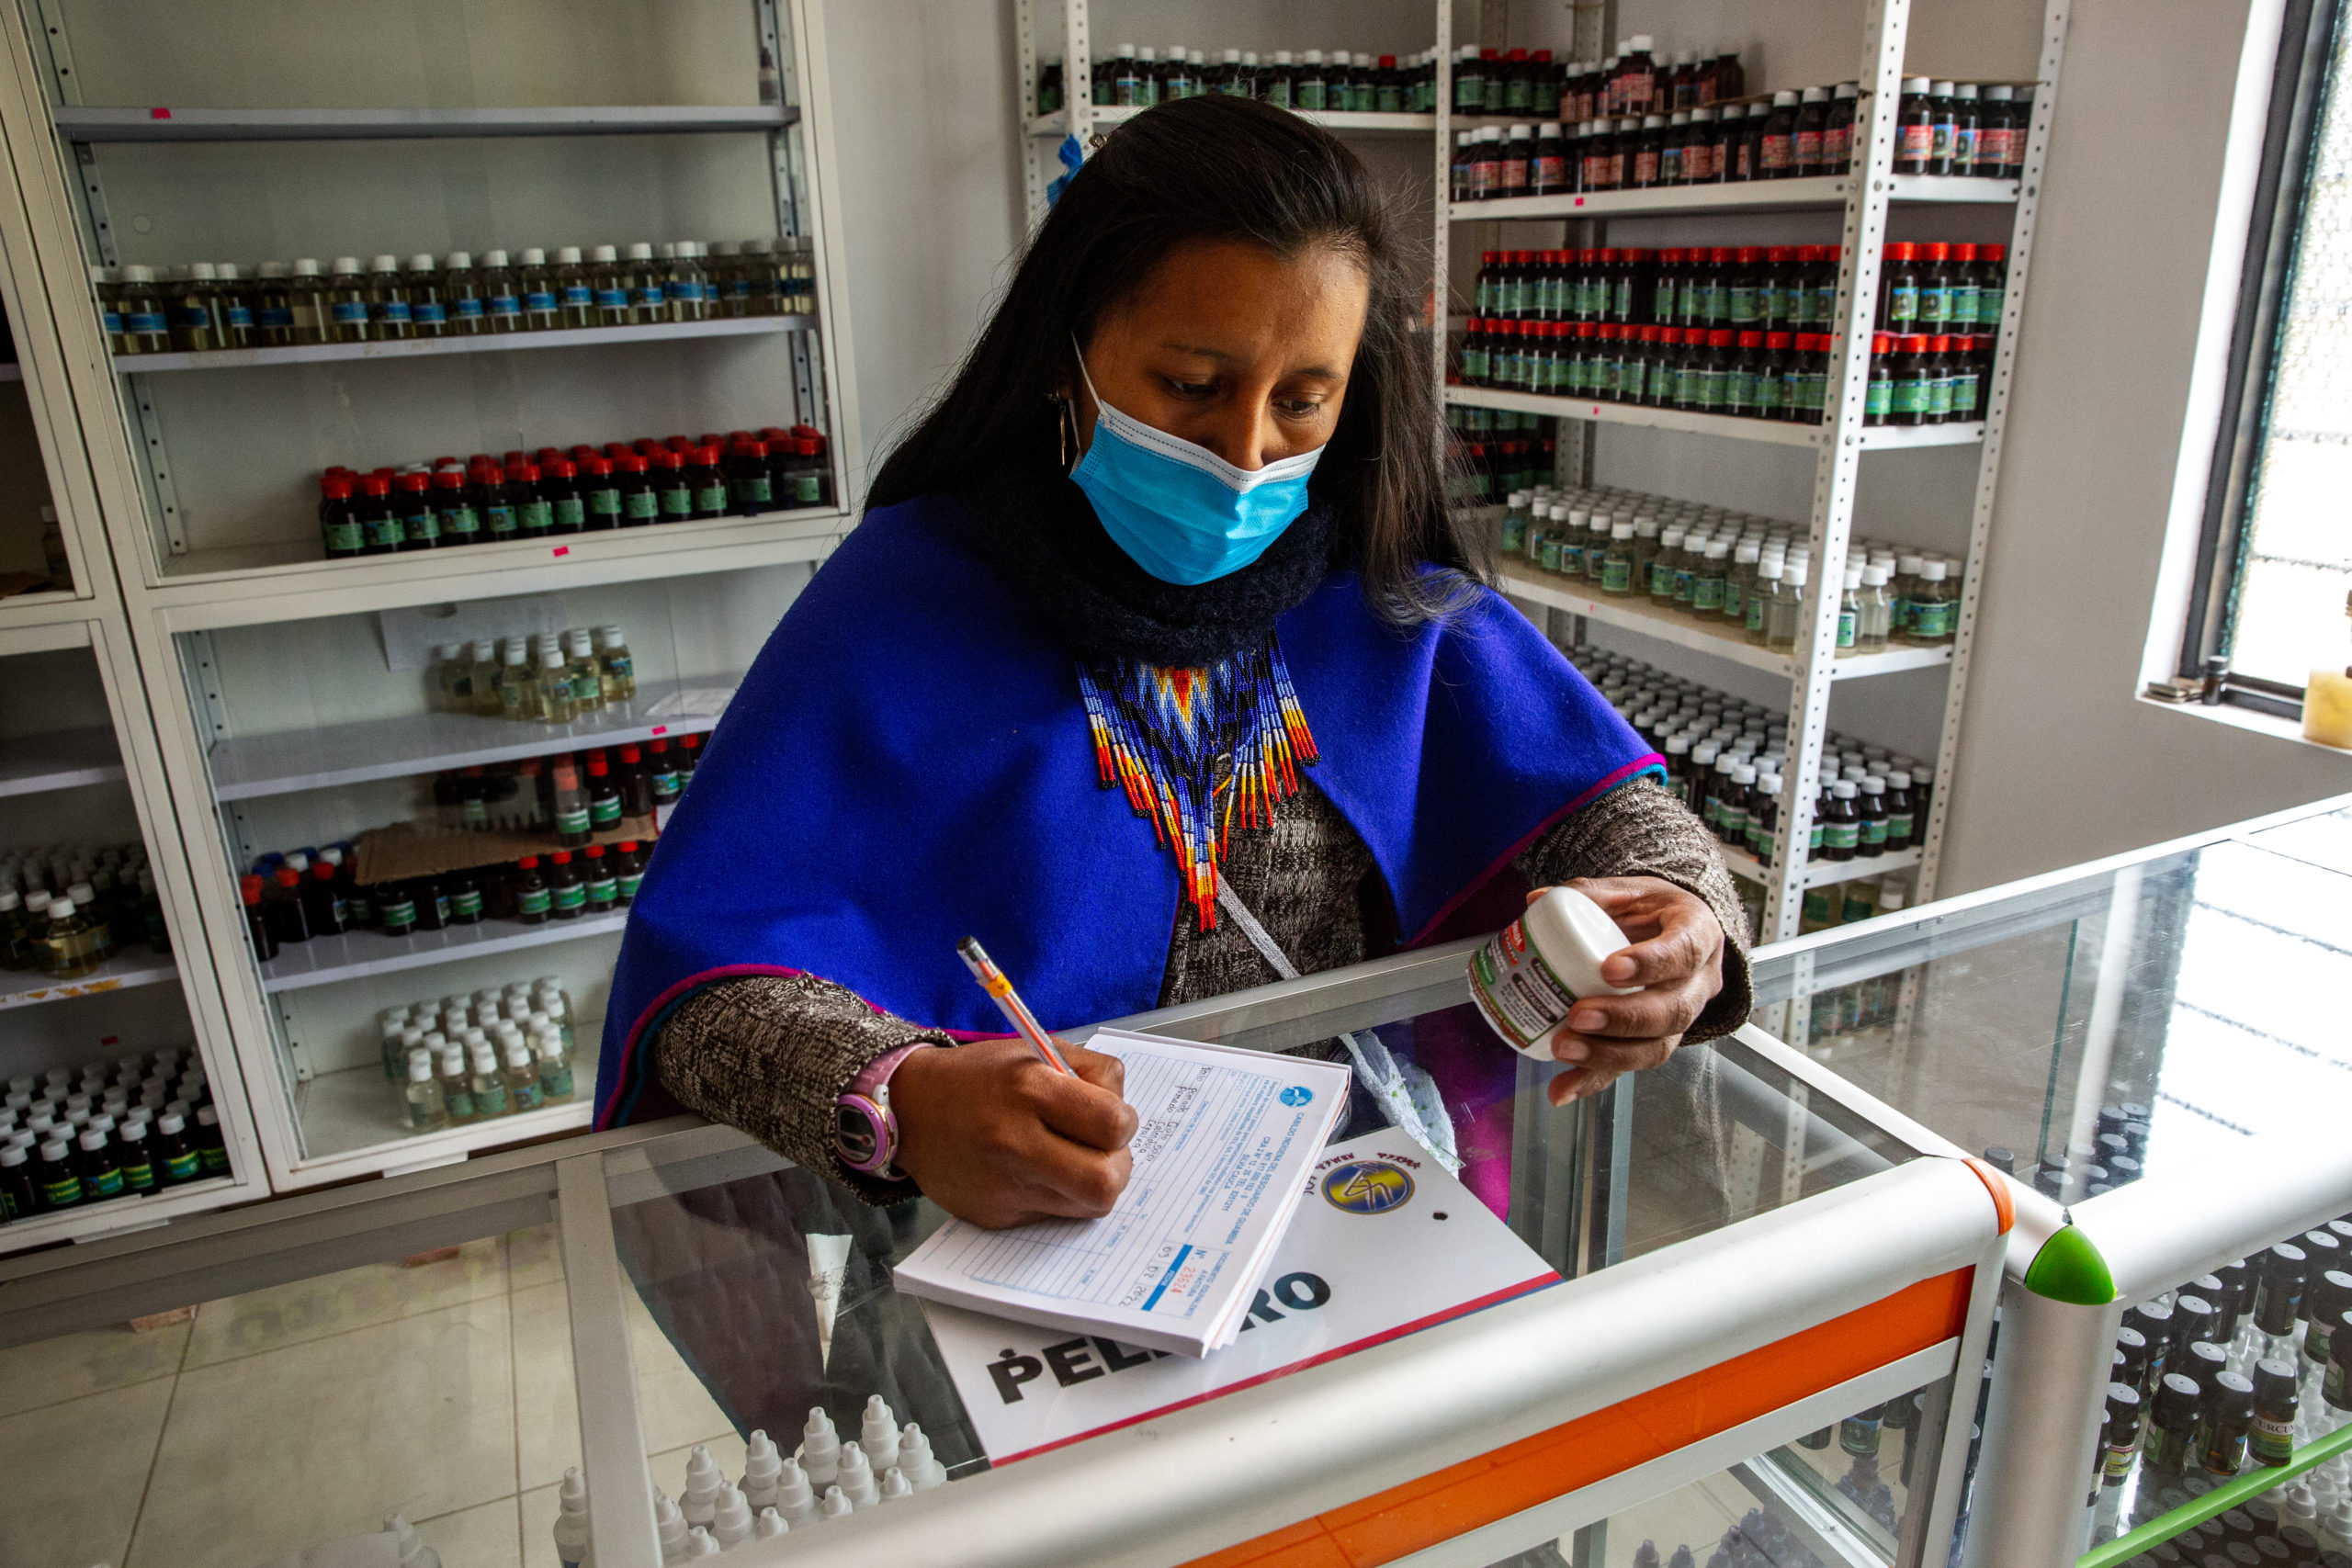 The Sierra Morena pharmacy sells products the Misak make in the natural medicine center / credit: Antonio Cascio